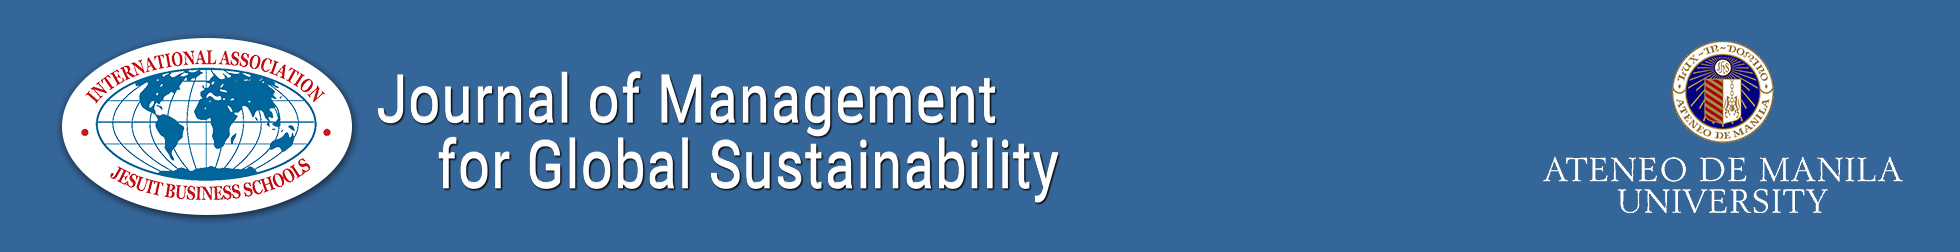 Journal of Management for Global Sustainability